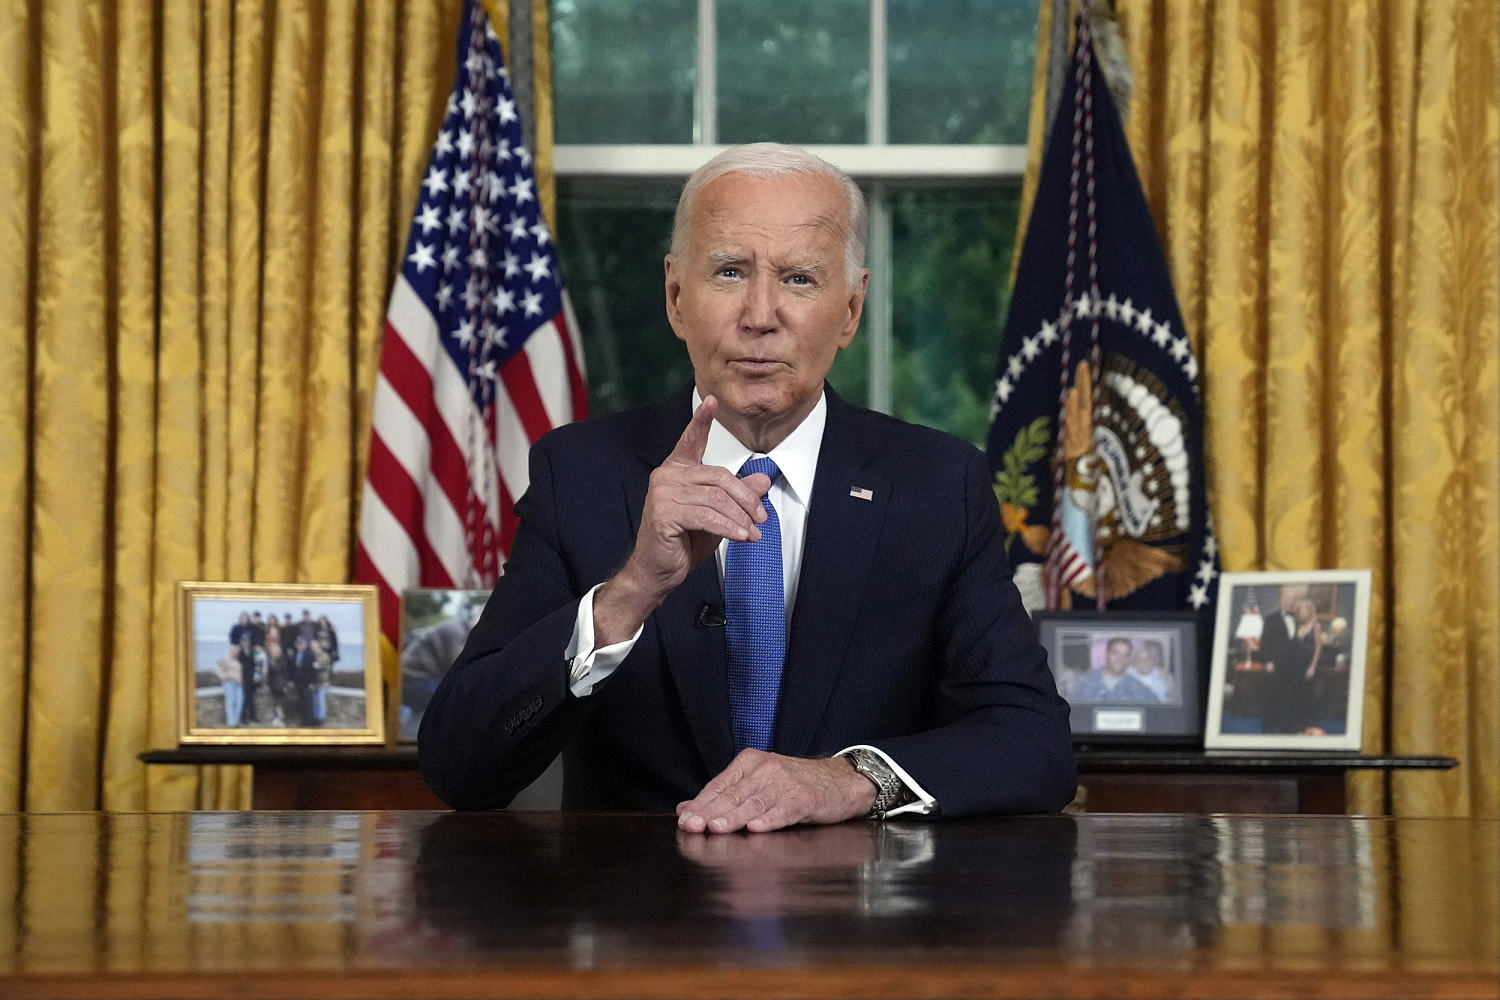 Why it matters that Biden said he wants Supreme Court reform